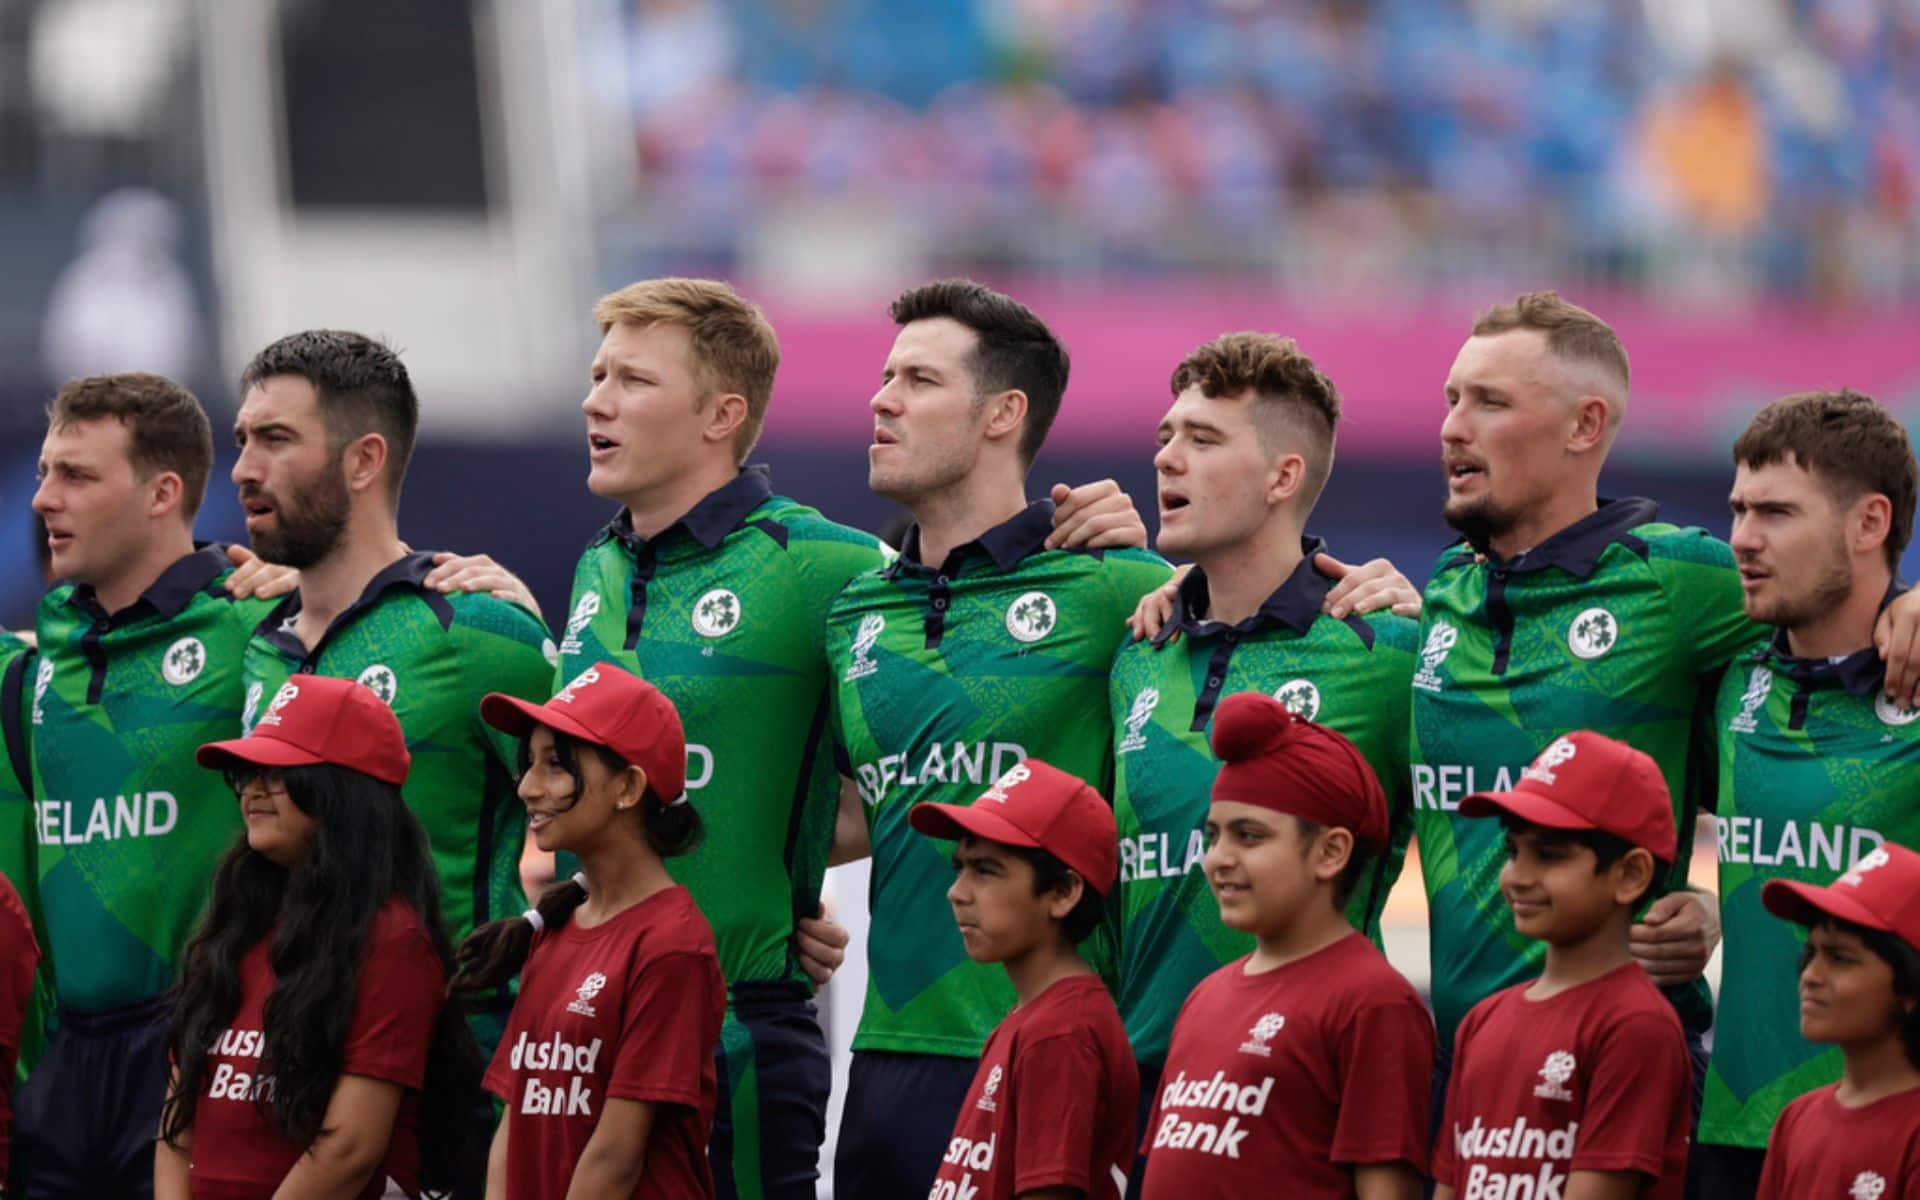 Cricket News: Know Some Hidden Facts About Ireland Team